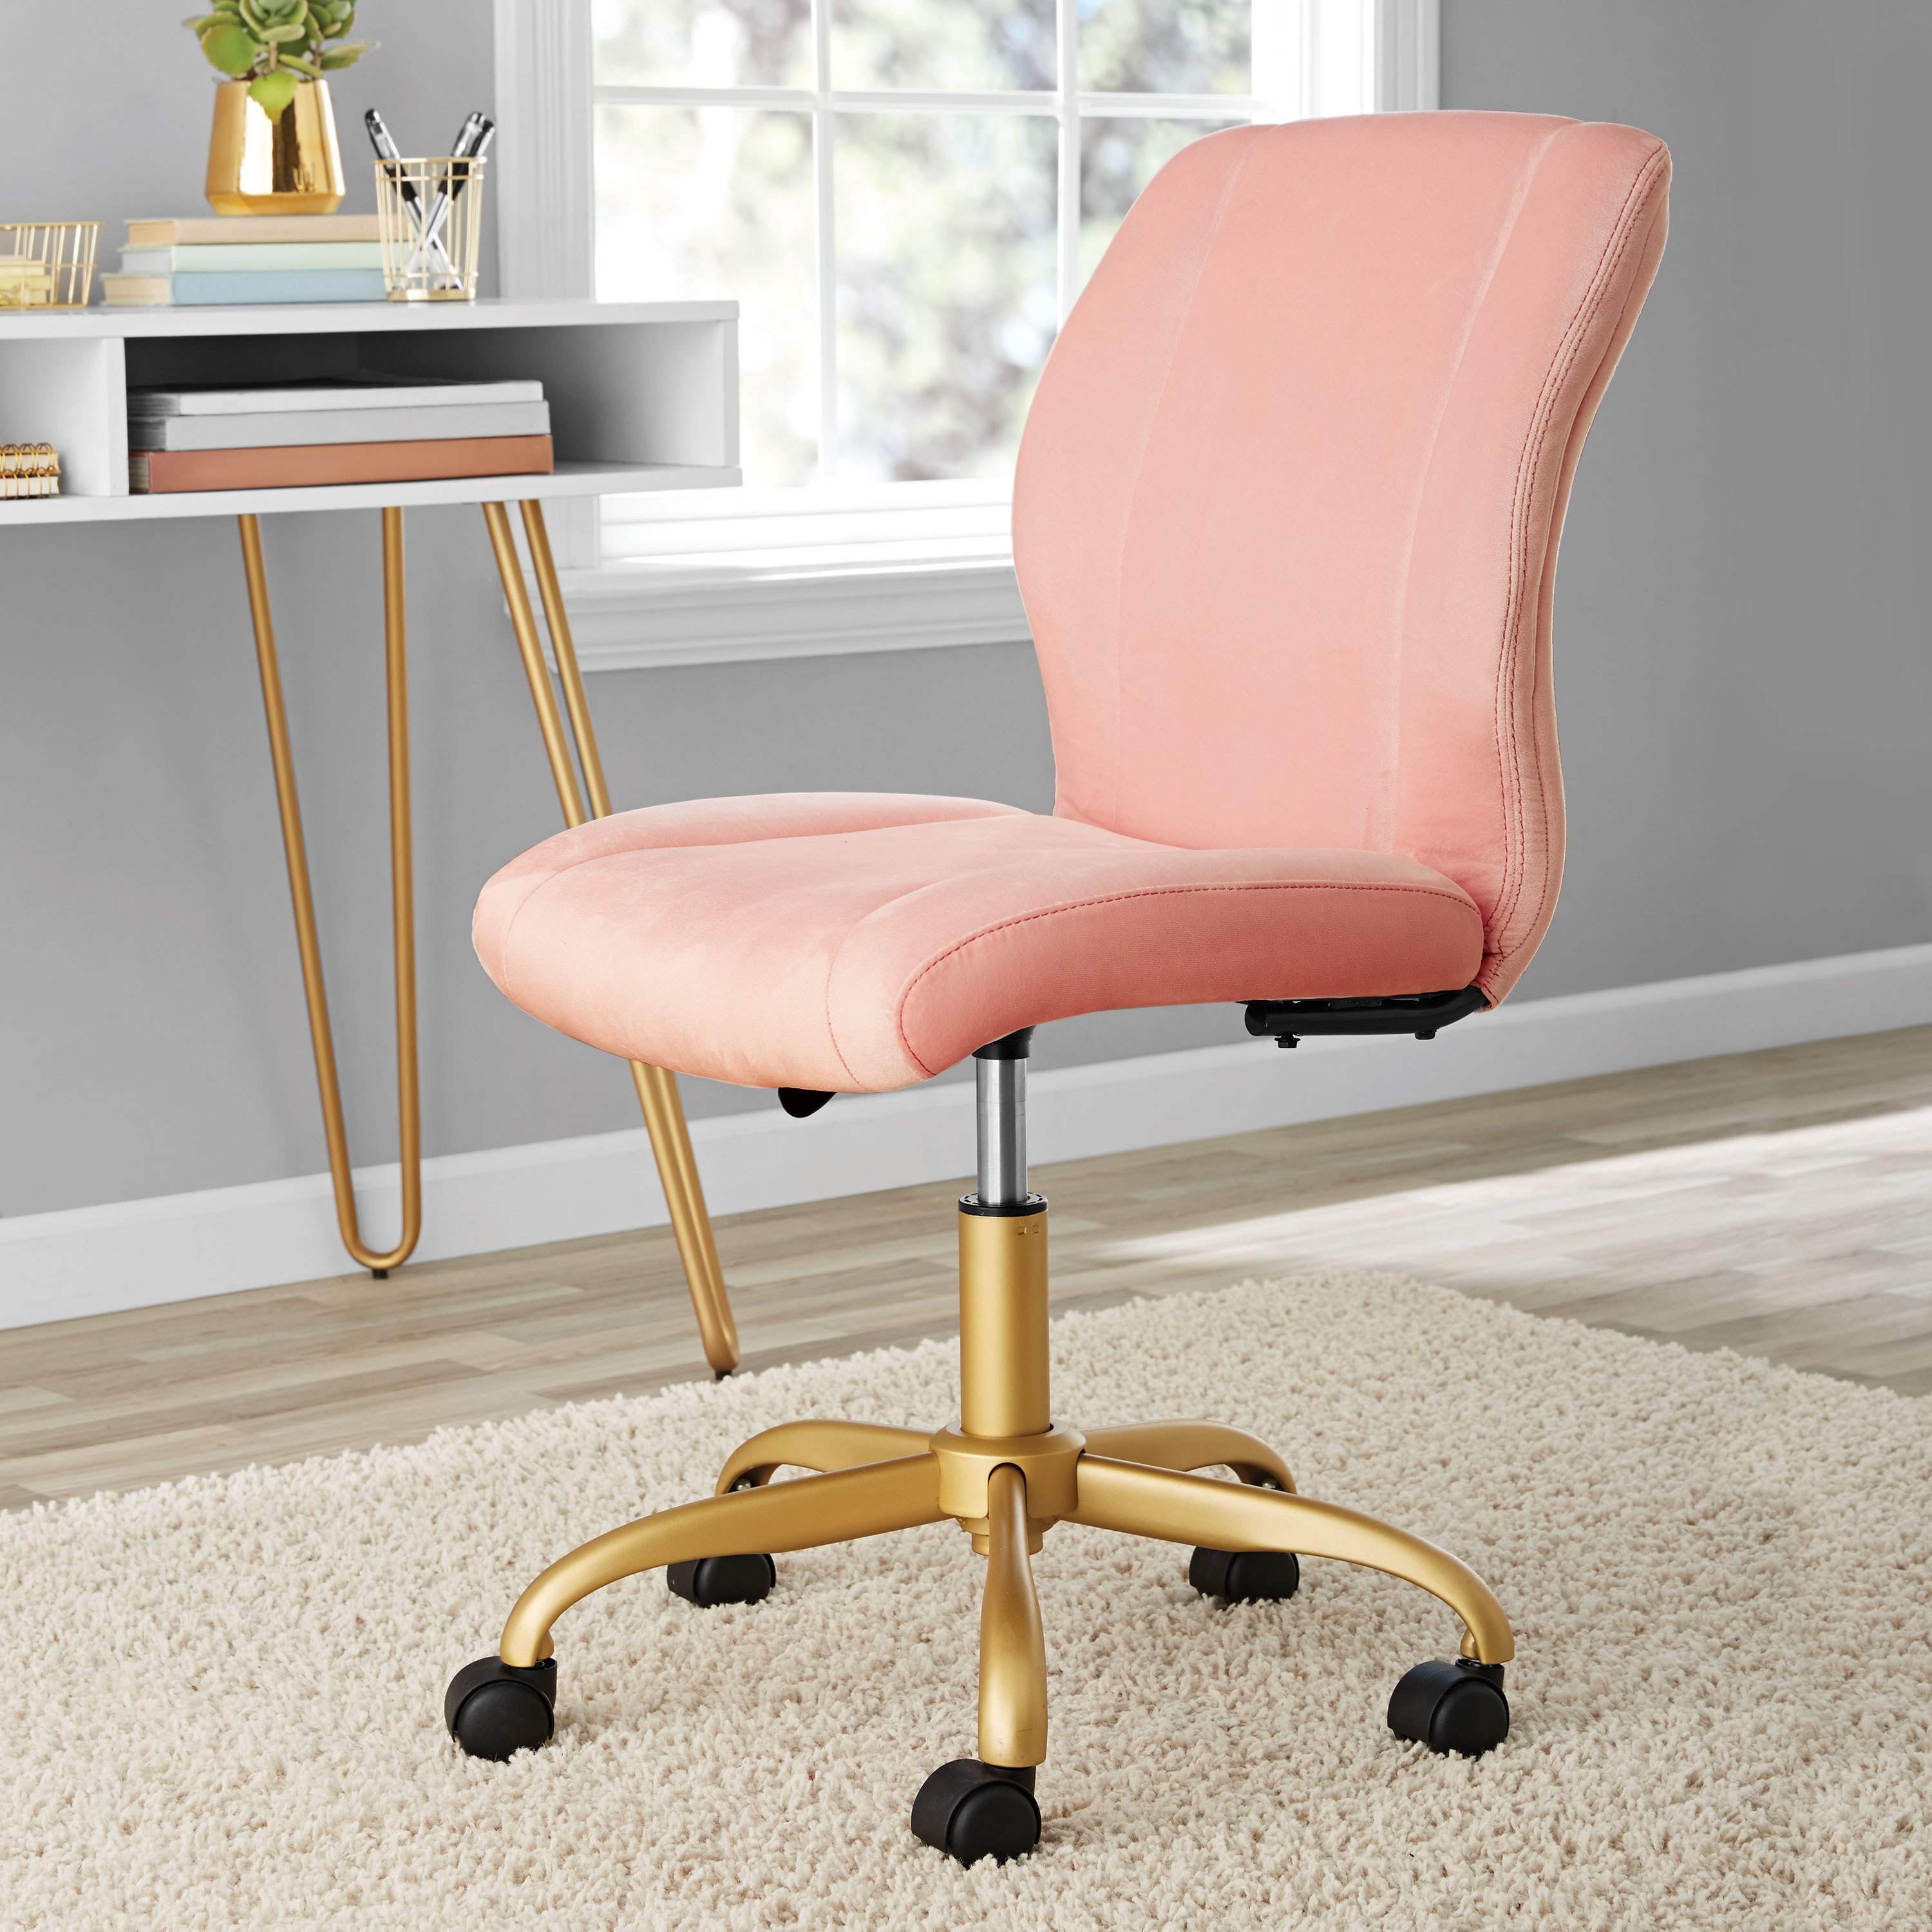 pink velvet armless office chair with gold legs and wheels